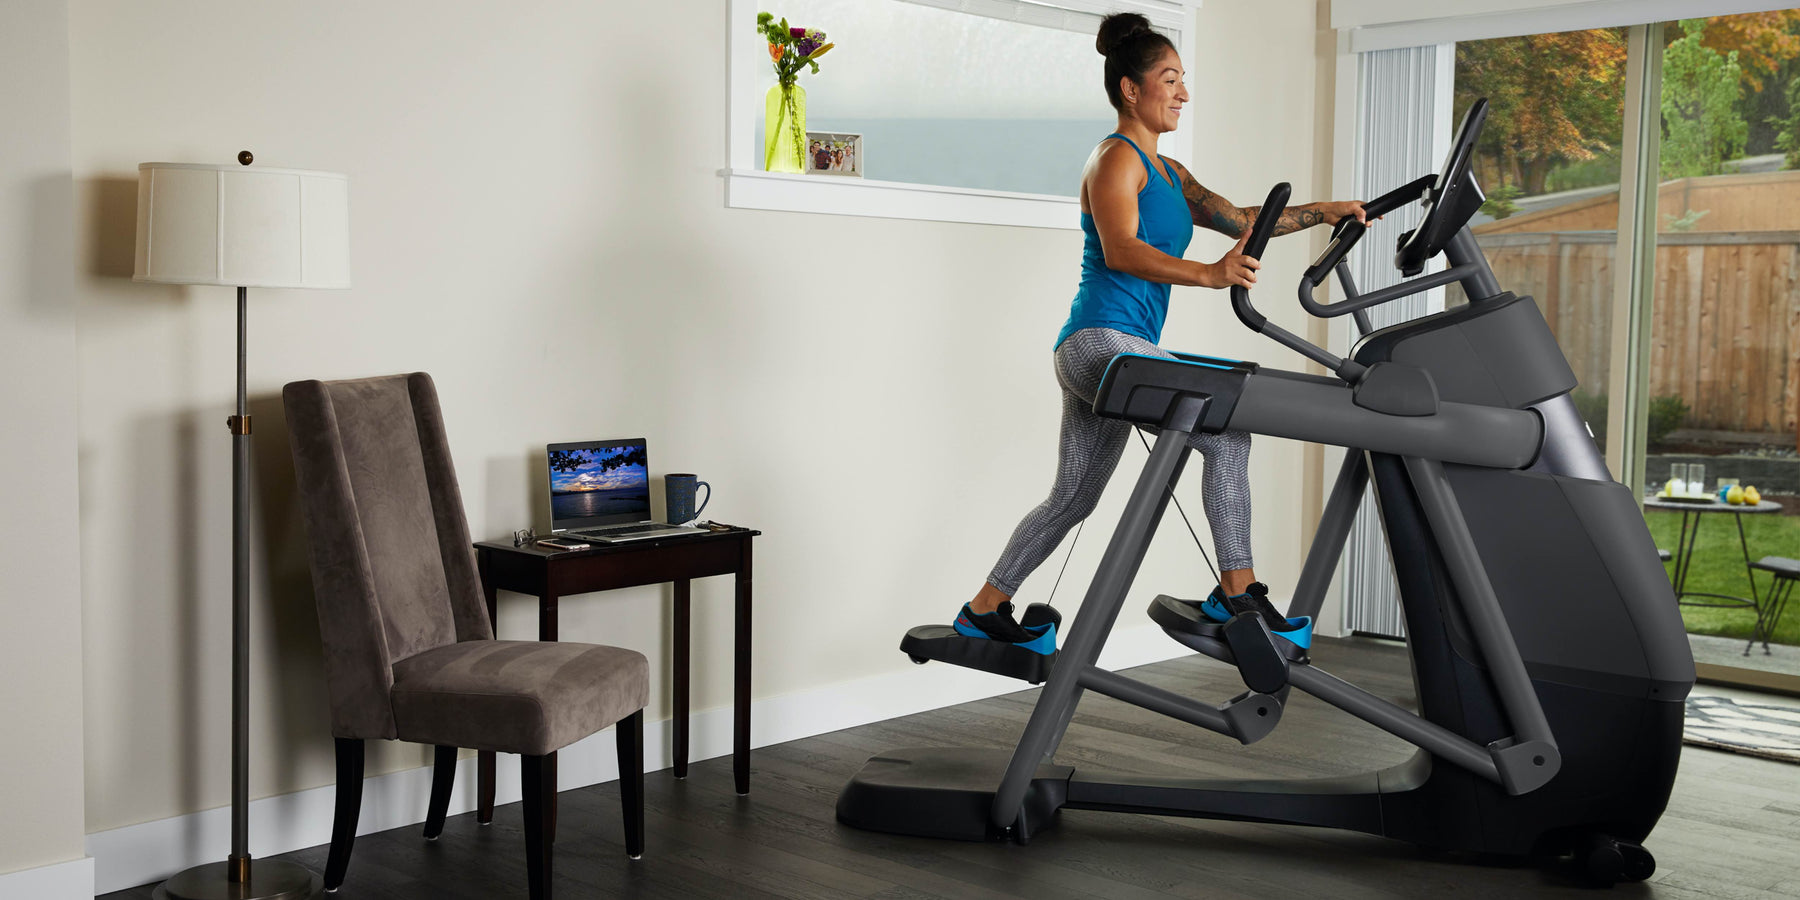 female exerciser cardio workout at home with the Precor 800 line AMT adaptive motion trainer